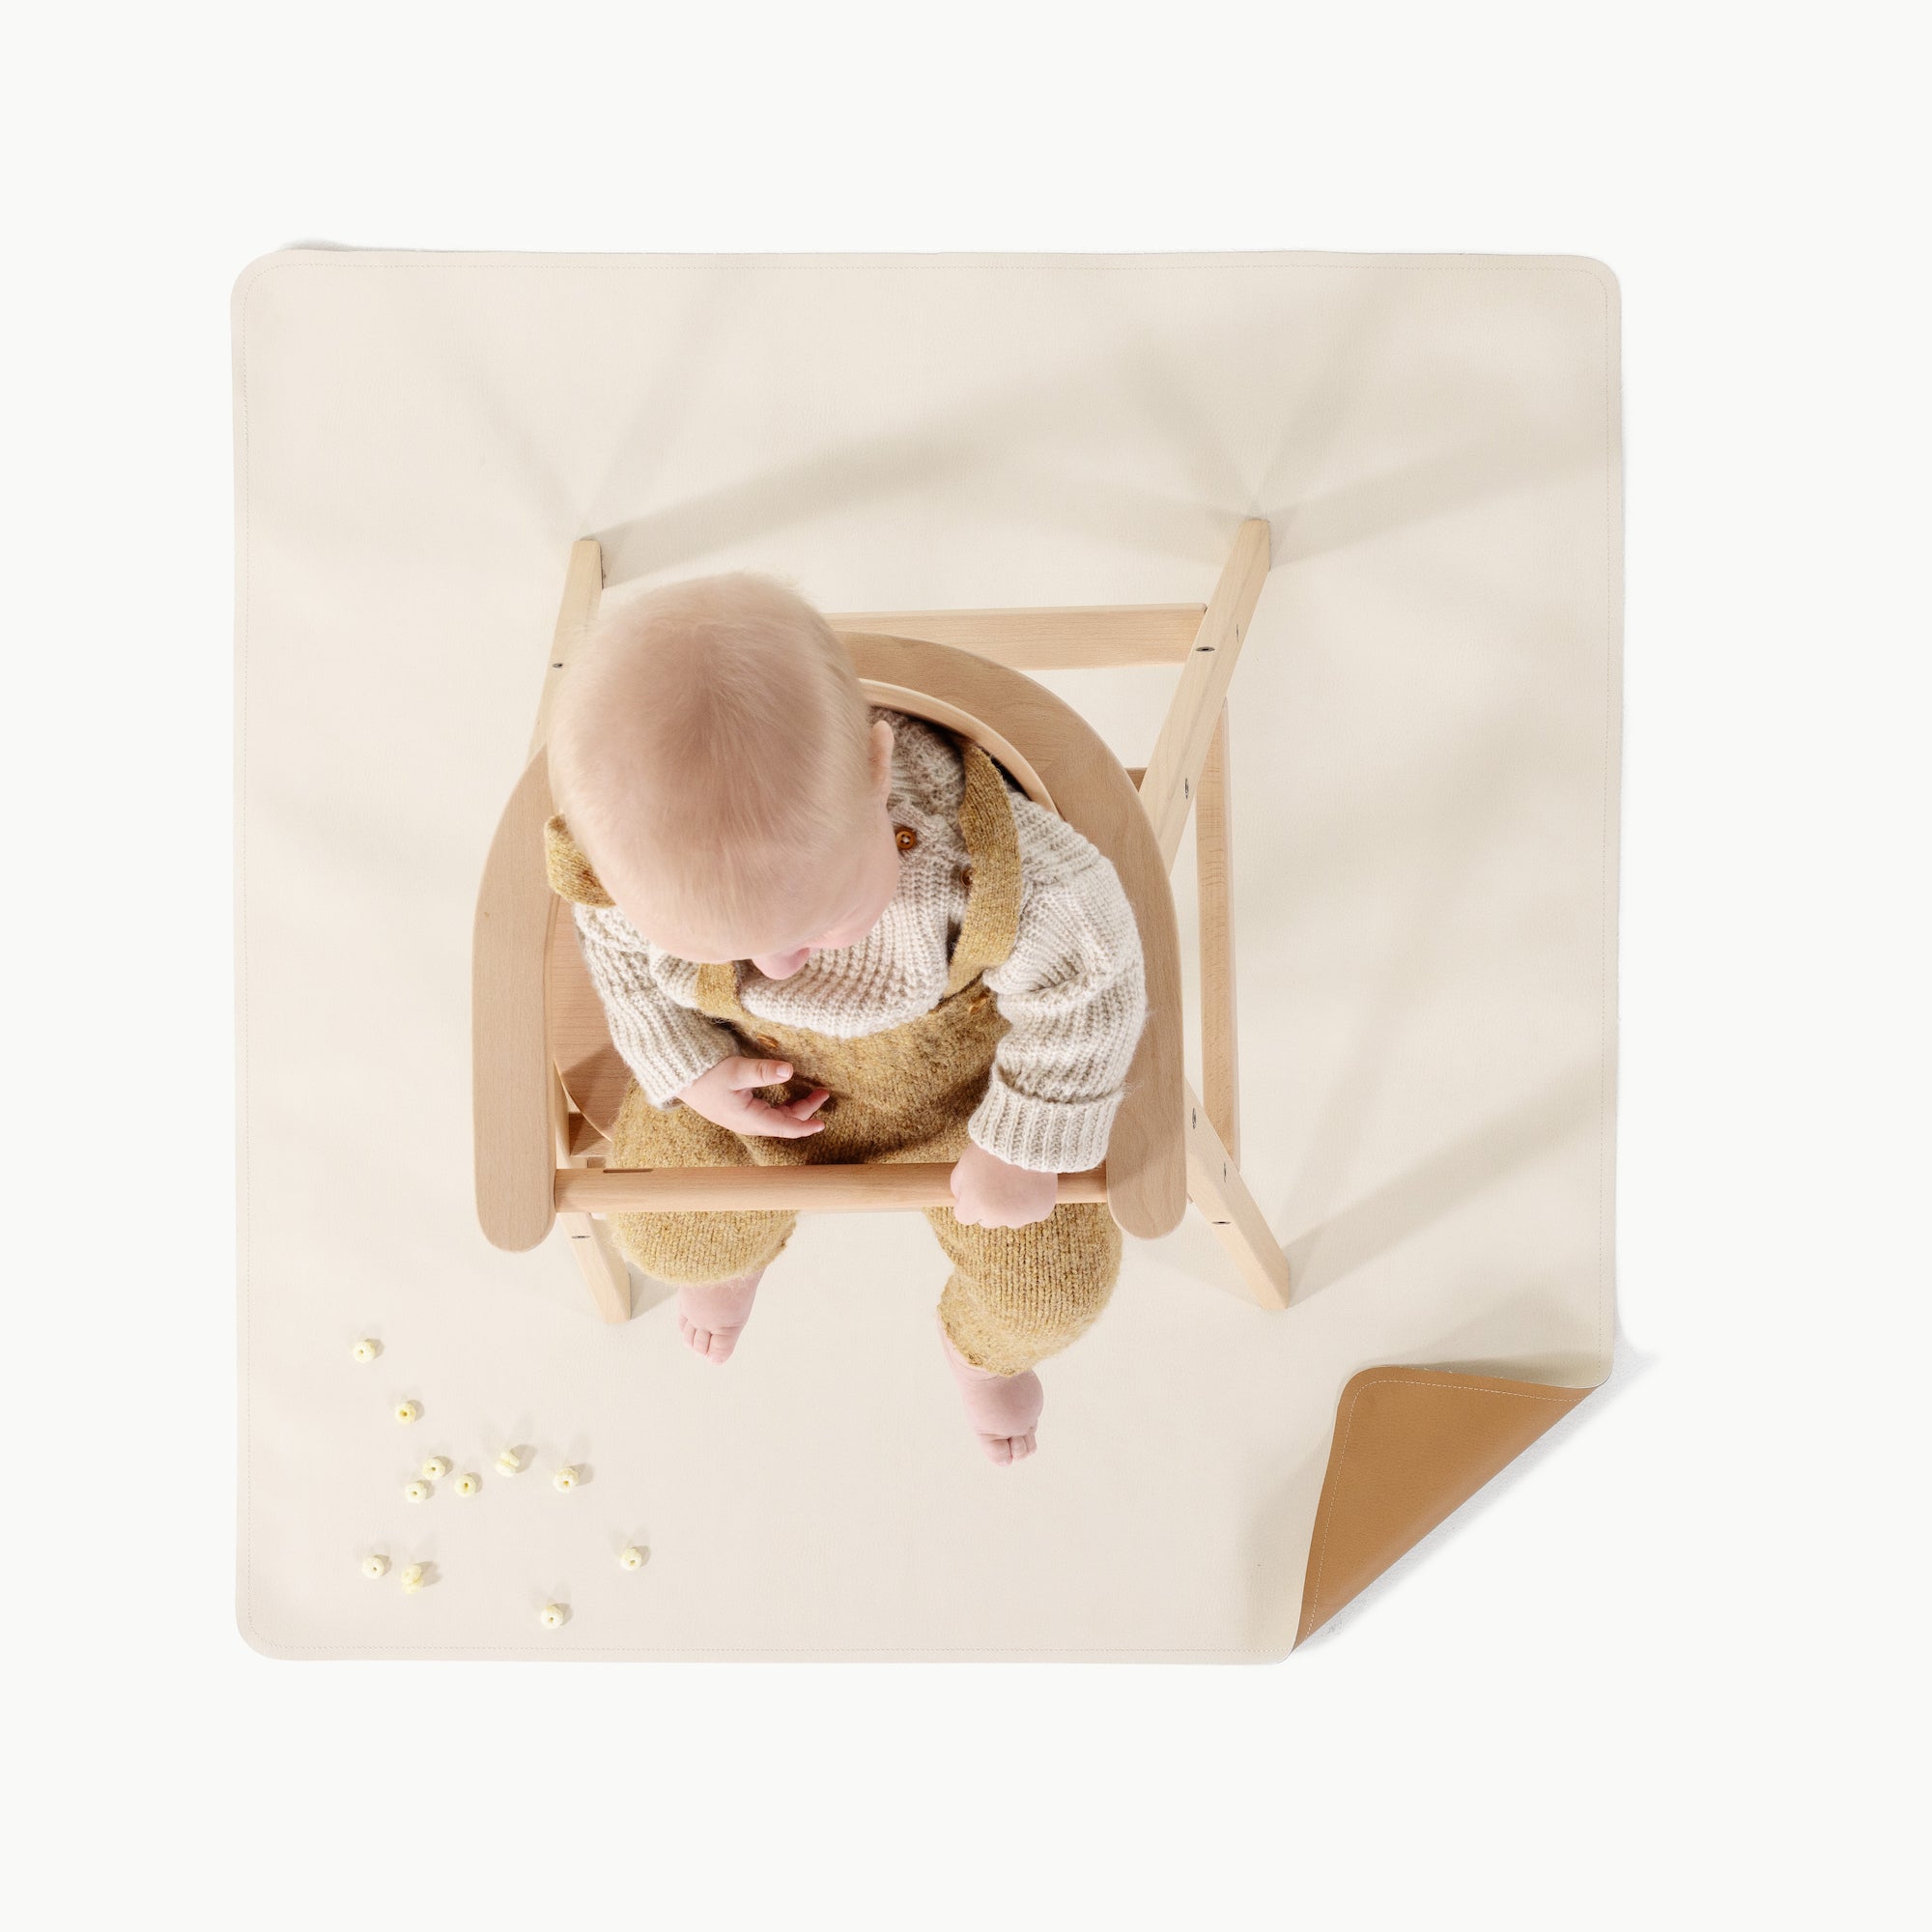 Camel • Ivory@overhead of baby in a high chair on mini mat